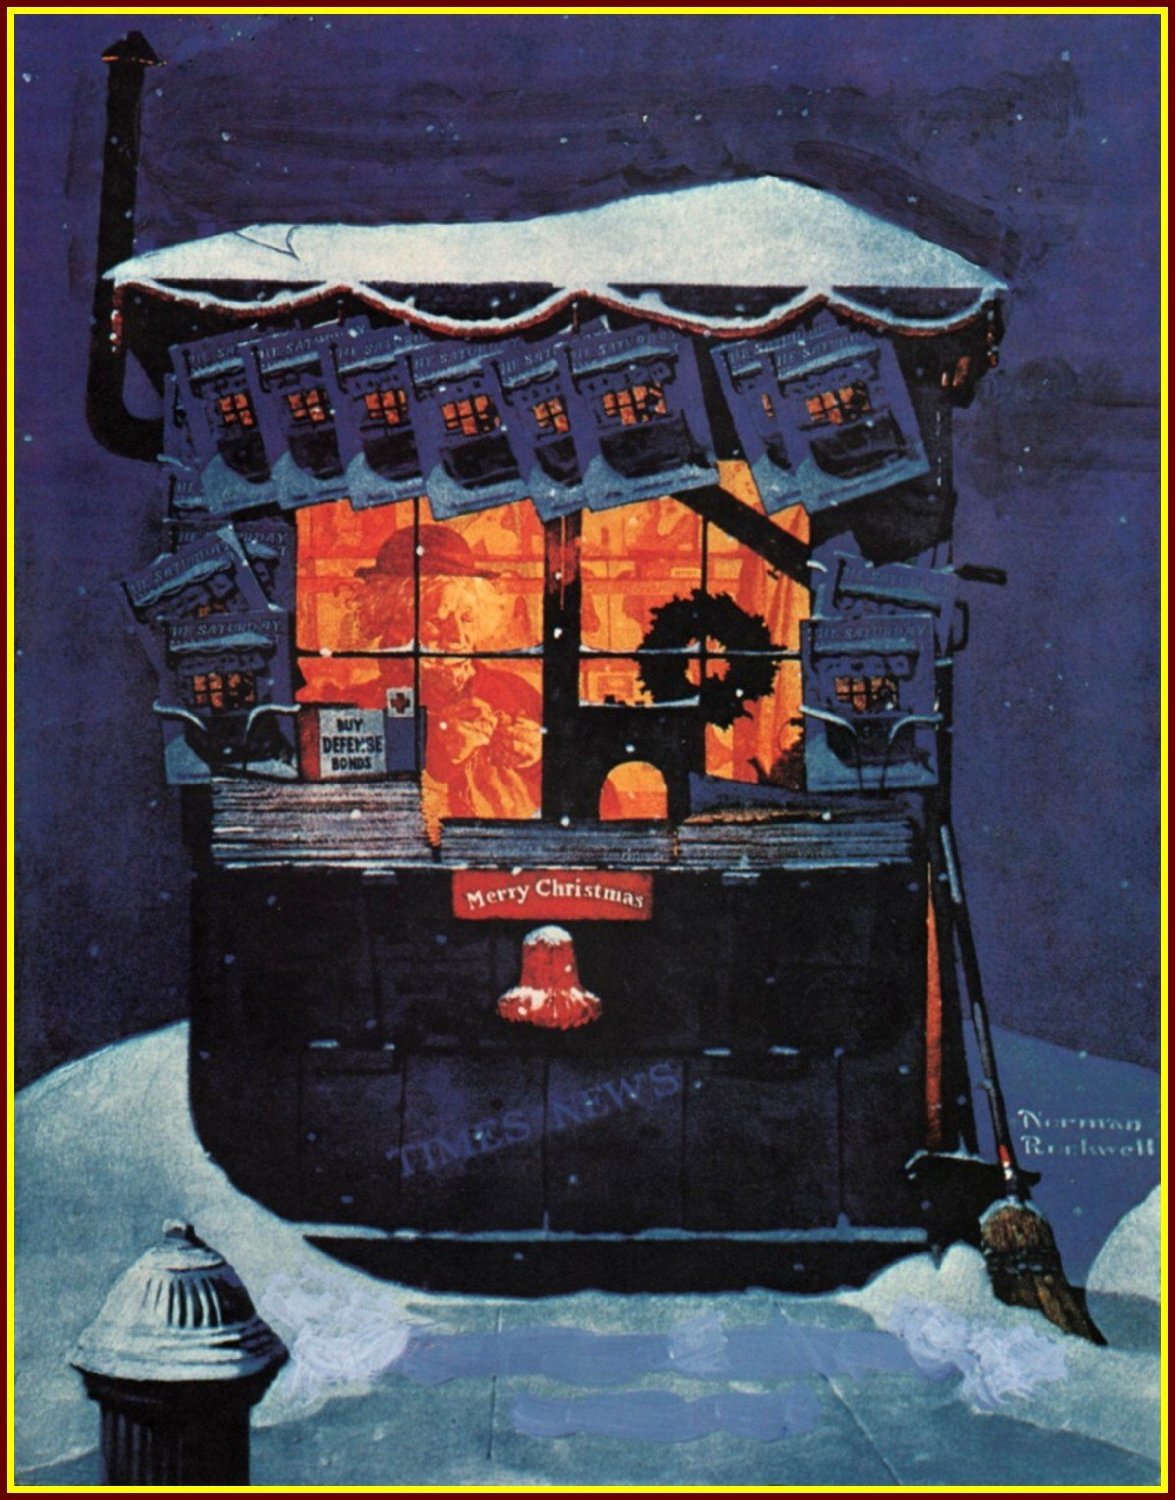 norman-rockwell-newsstand in the snow-saturday-evening-post-cover-december 20-1941